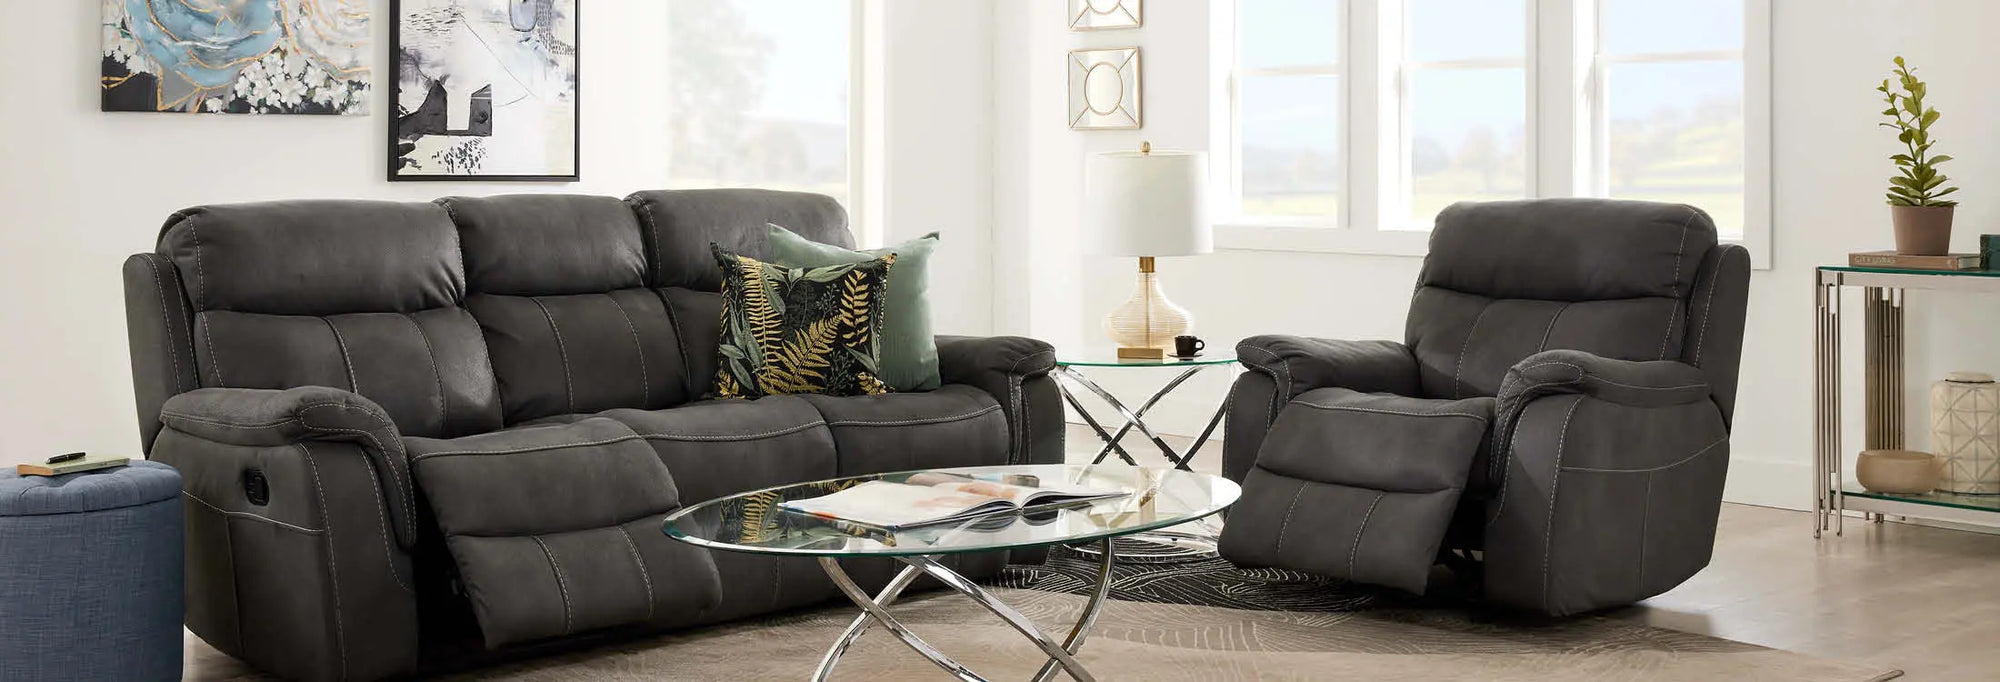 No Money Miracle. No Money Down! Not even the taxes or fees! No monthly payments until 2025 with 0% interest. Click here for details. Save $1200. Jupiter 4-piece sectional now only $1999. View Flyer. Find your store.